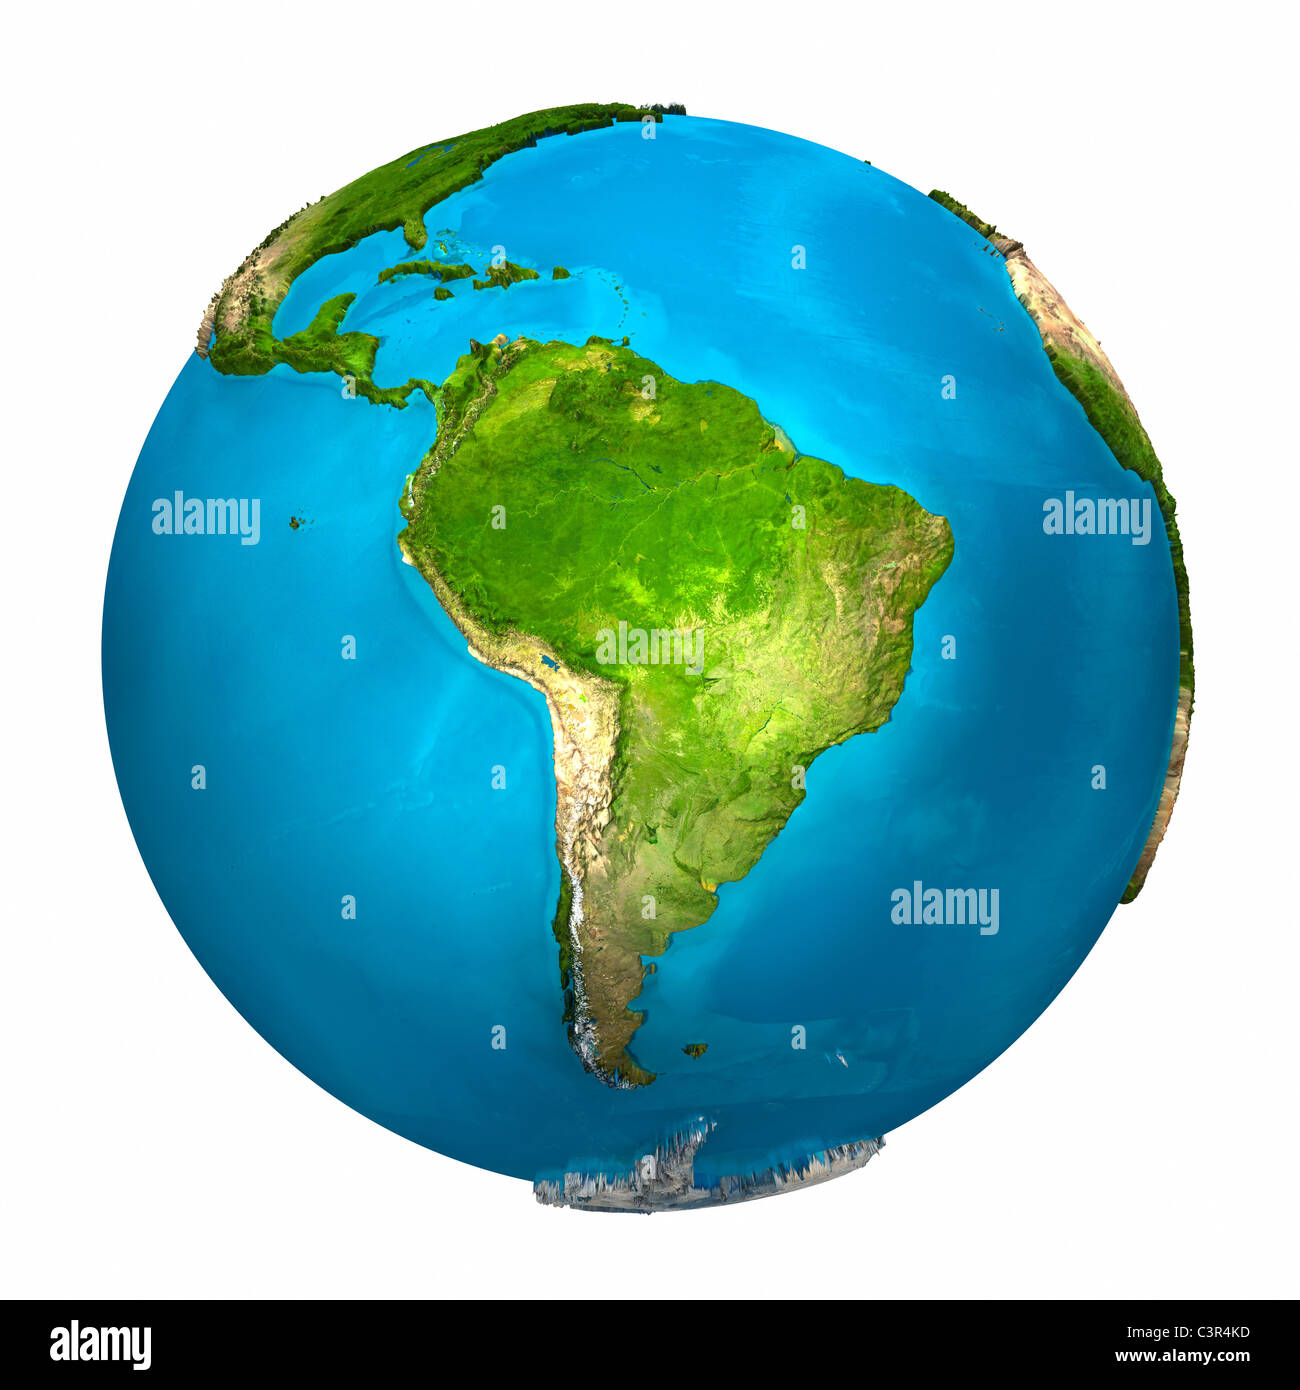 Planet Earth - South America - colorful globe with detailed and realistic surface, 3d render Stock Photo